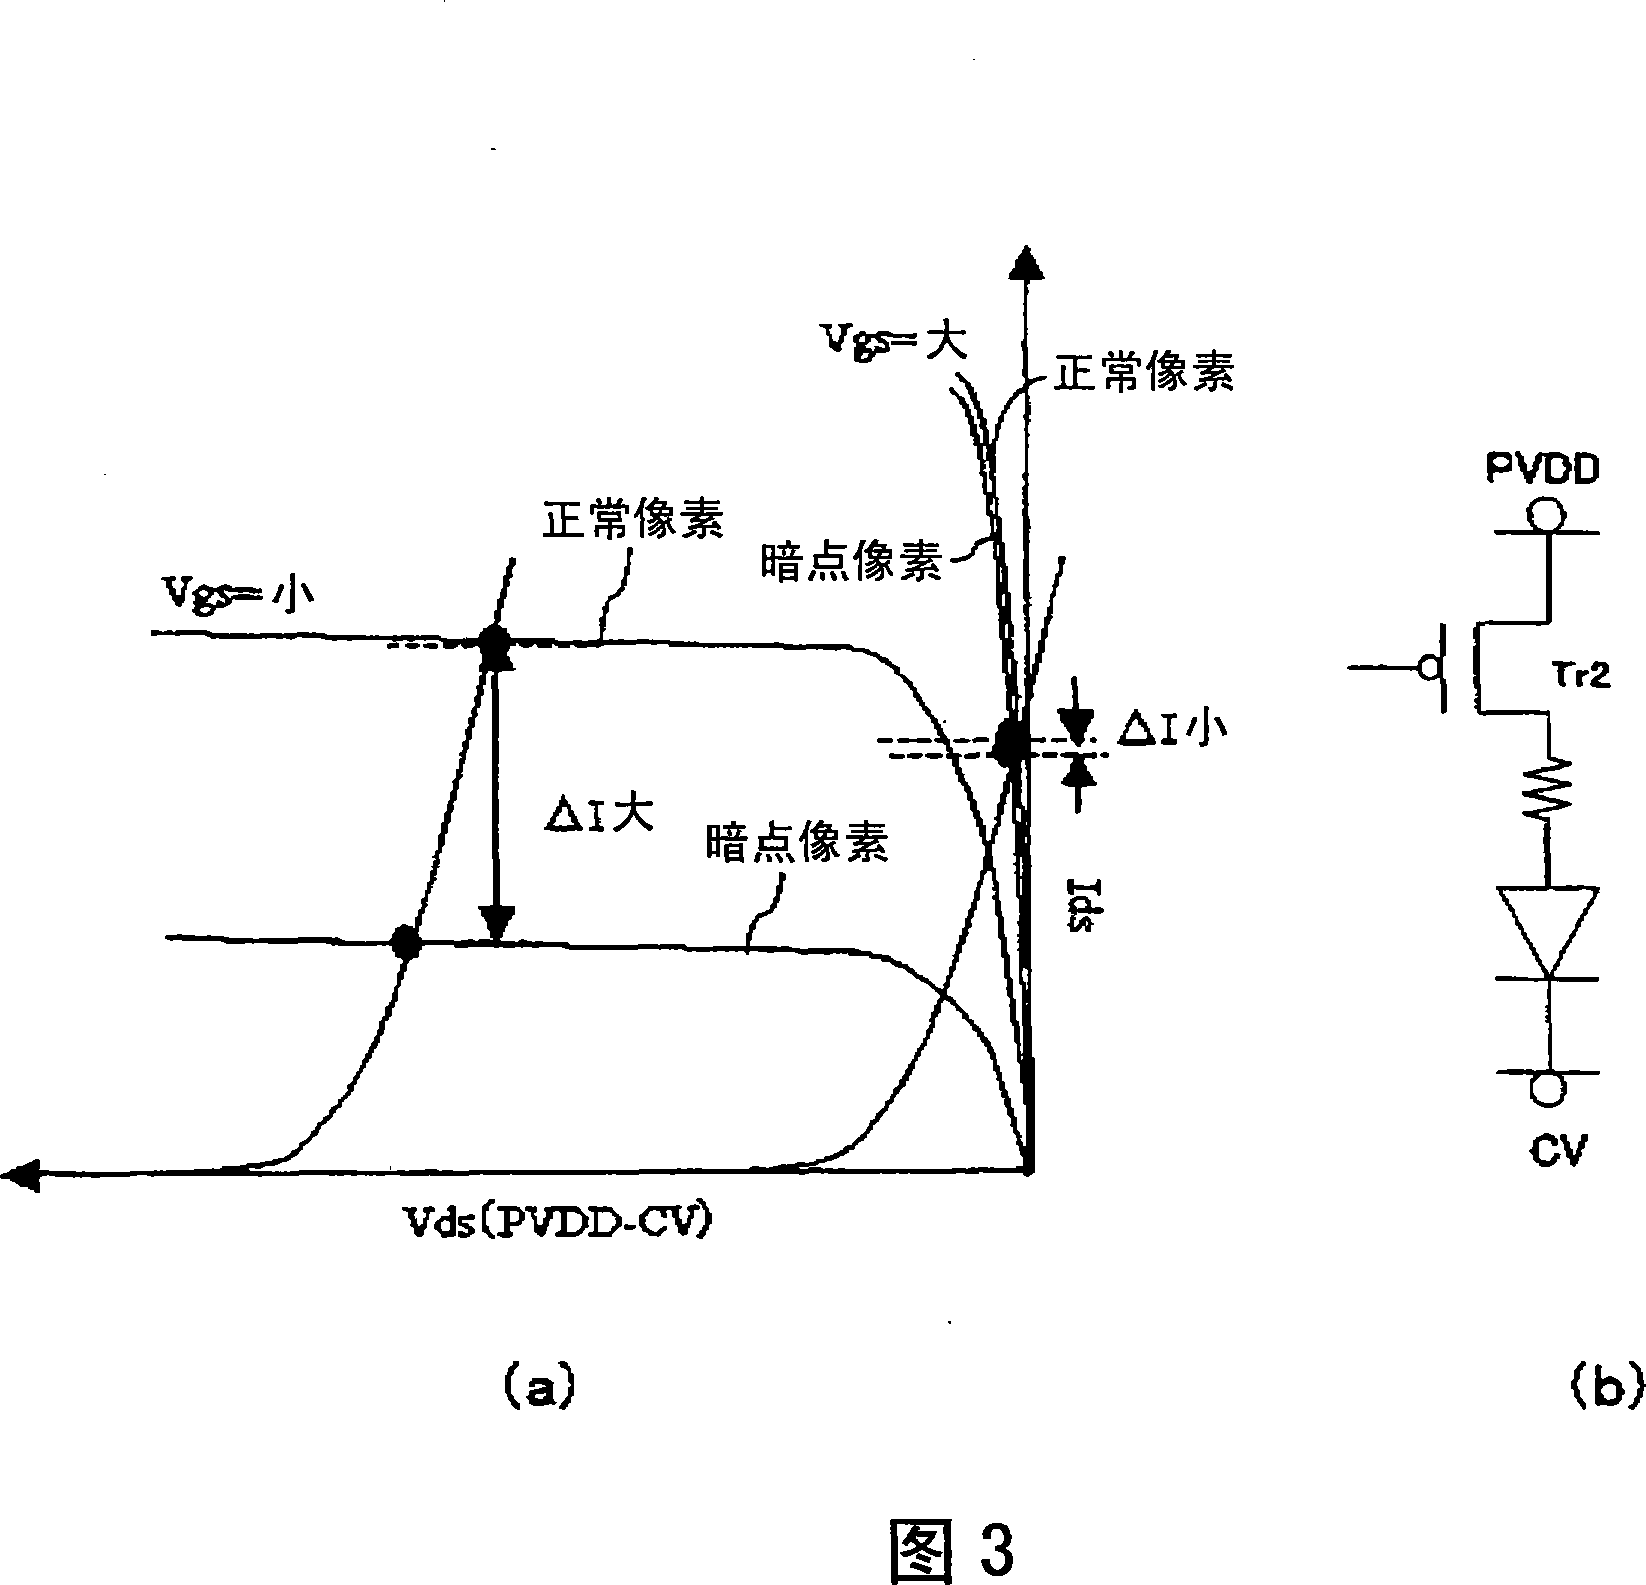 Method of inspecting defect for electroluminescence display apparatus, repairing method and manufacturing method